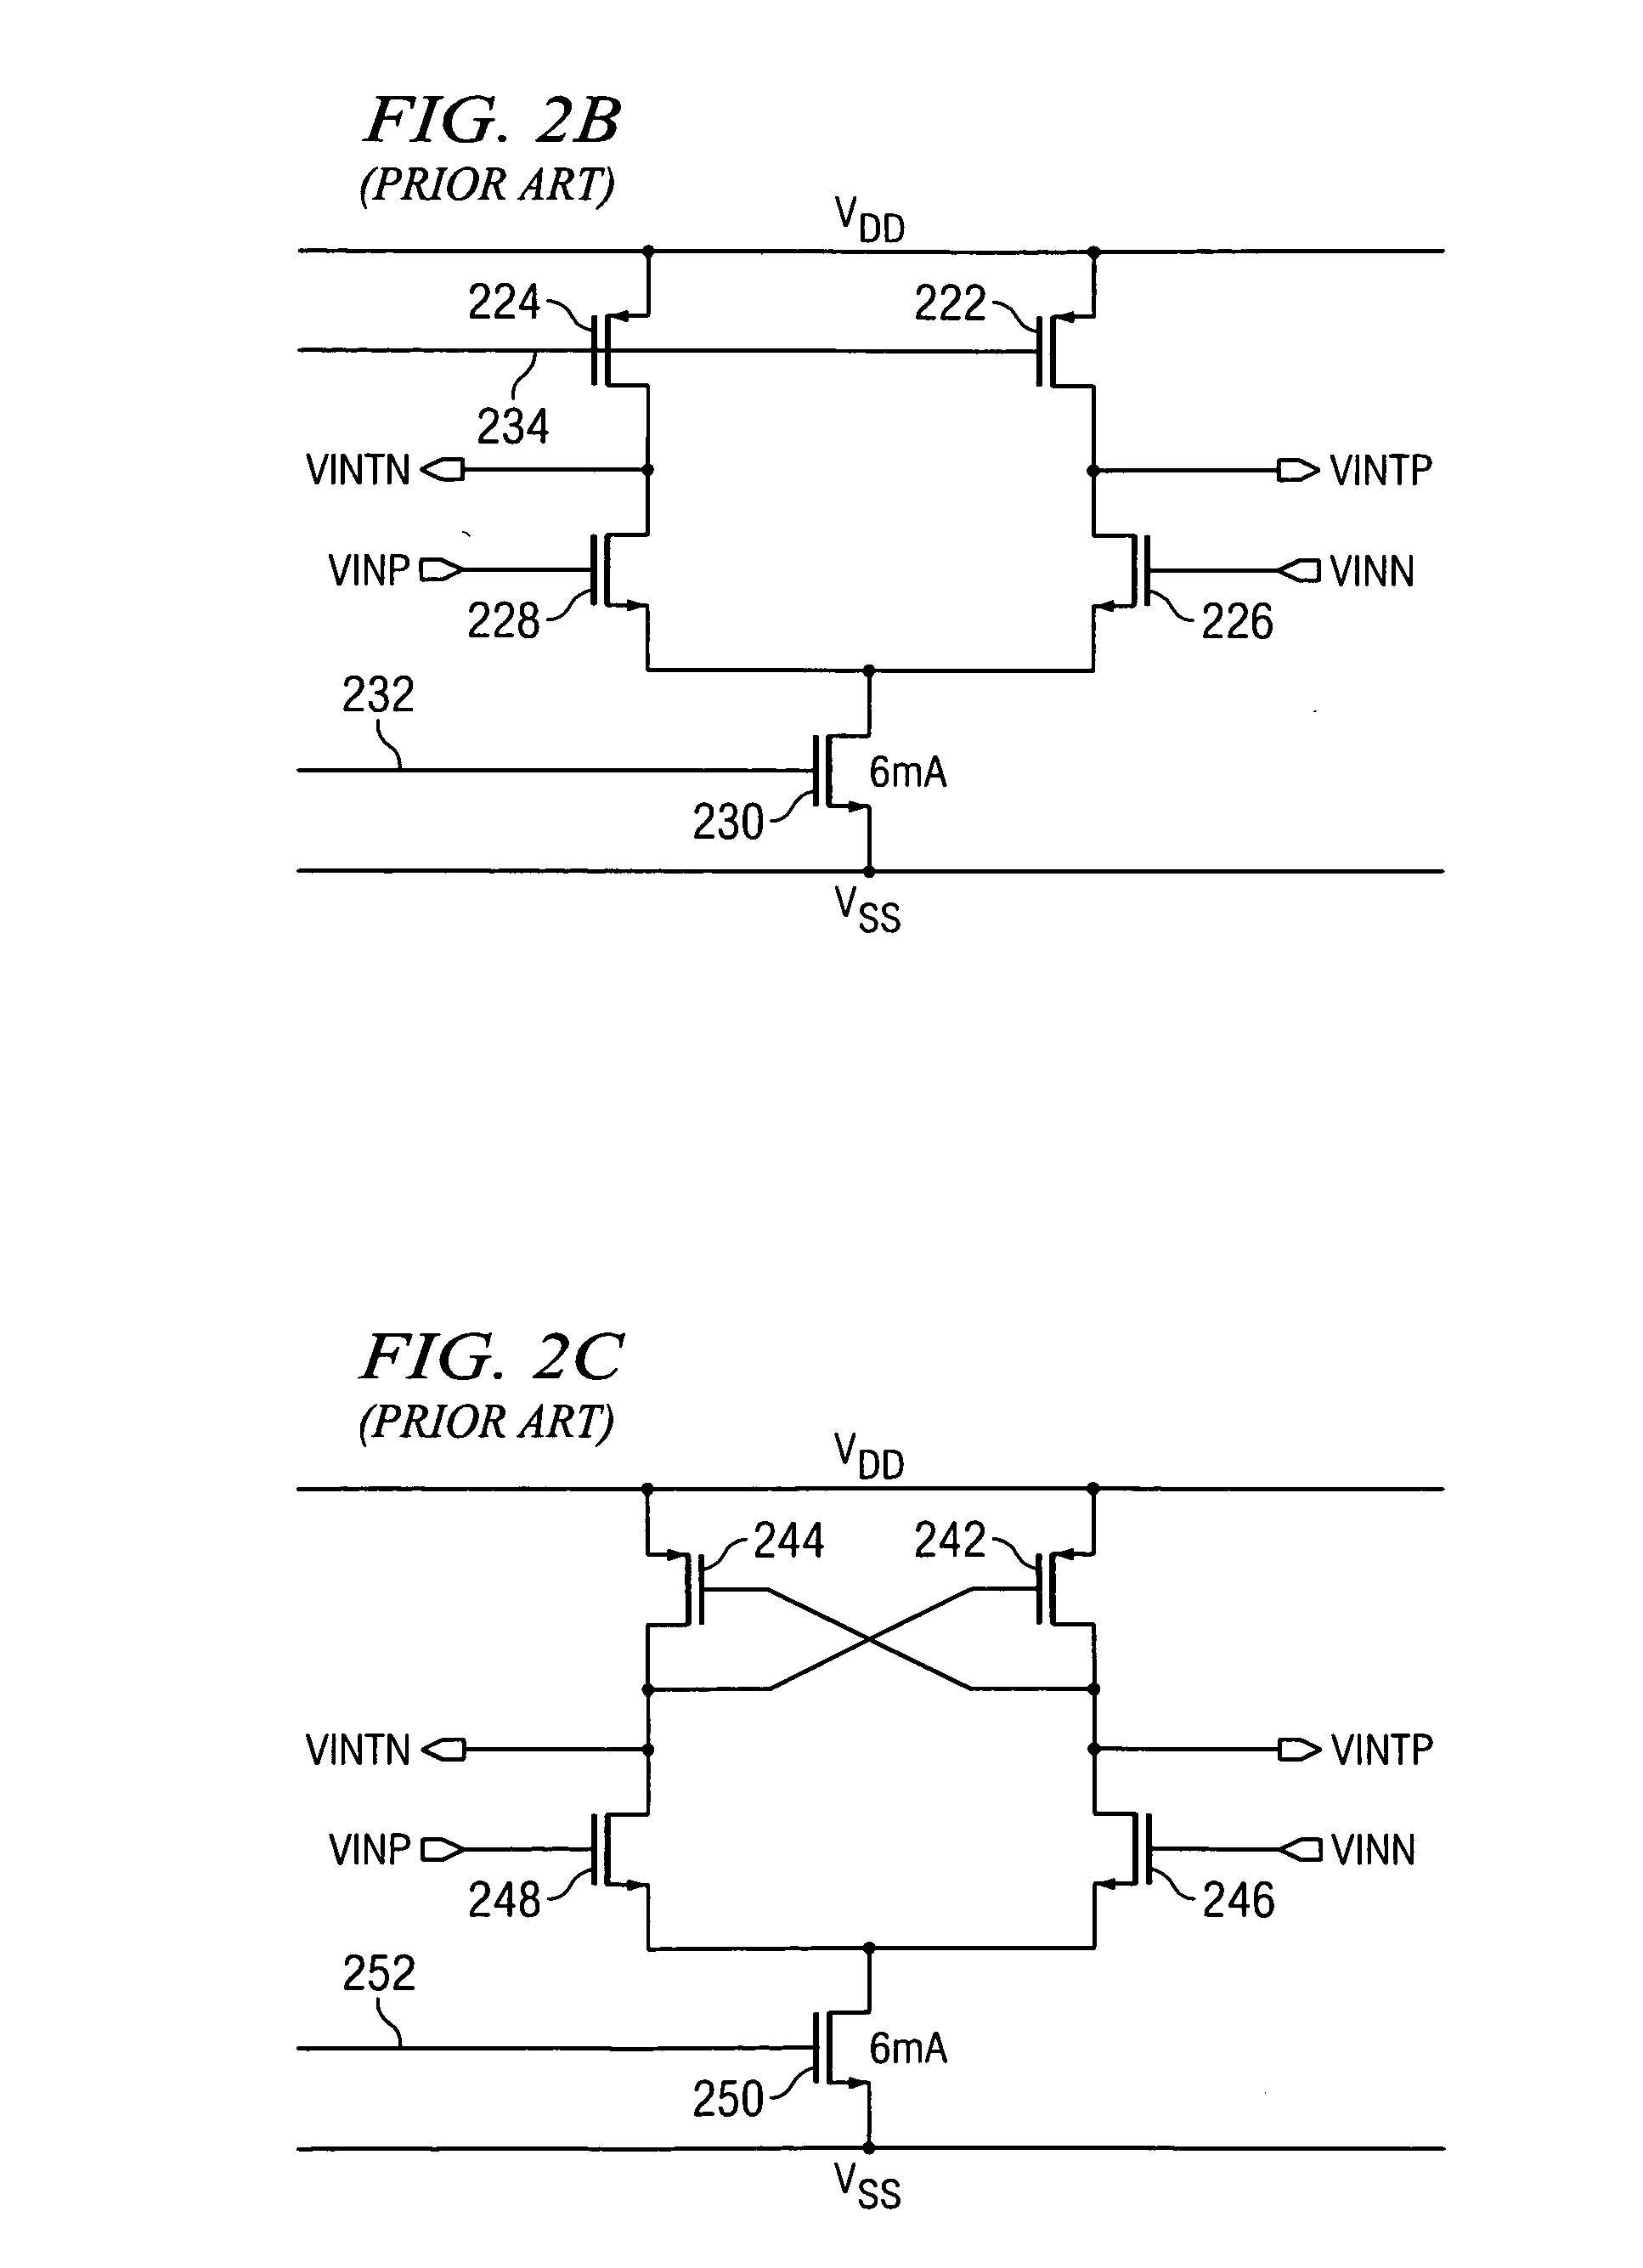 Method and apparatus for improved clock preamplifier with low jitter